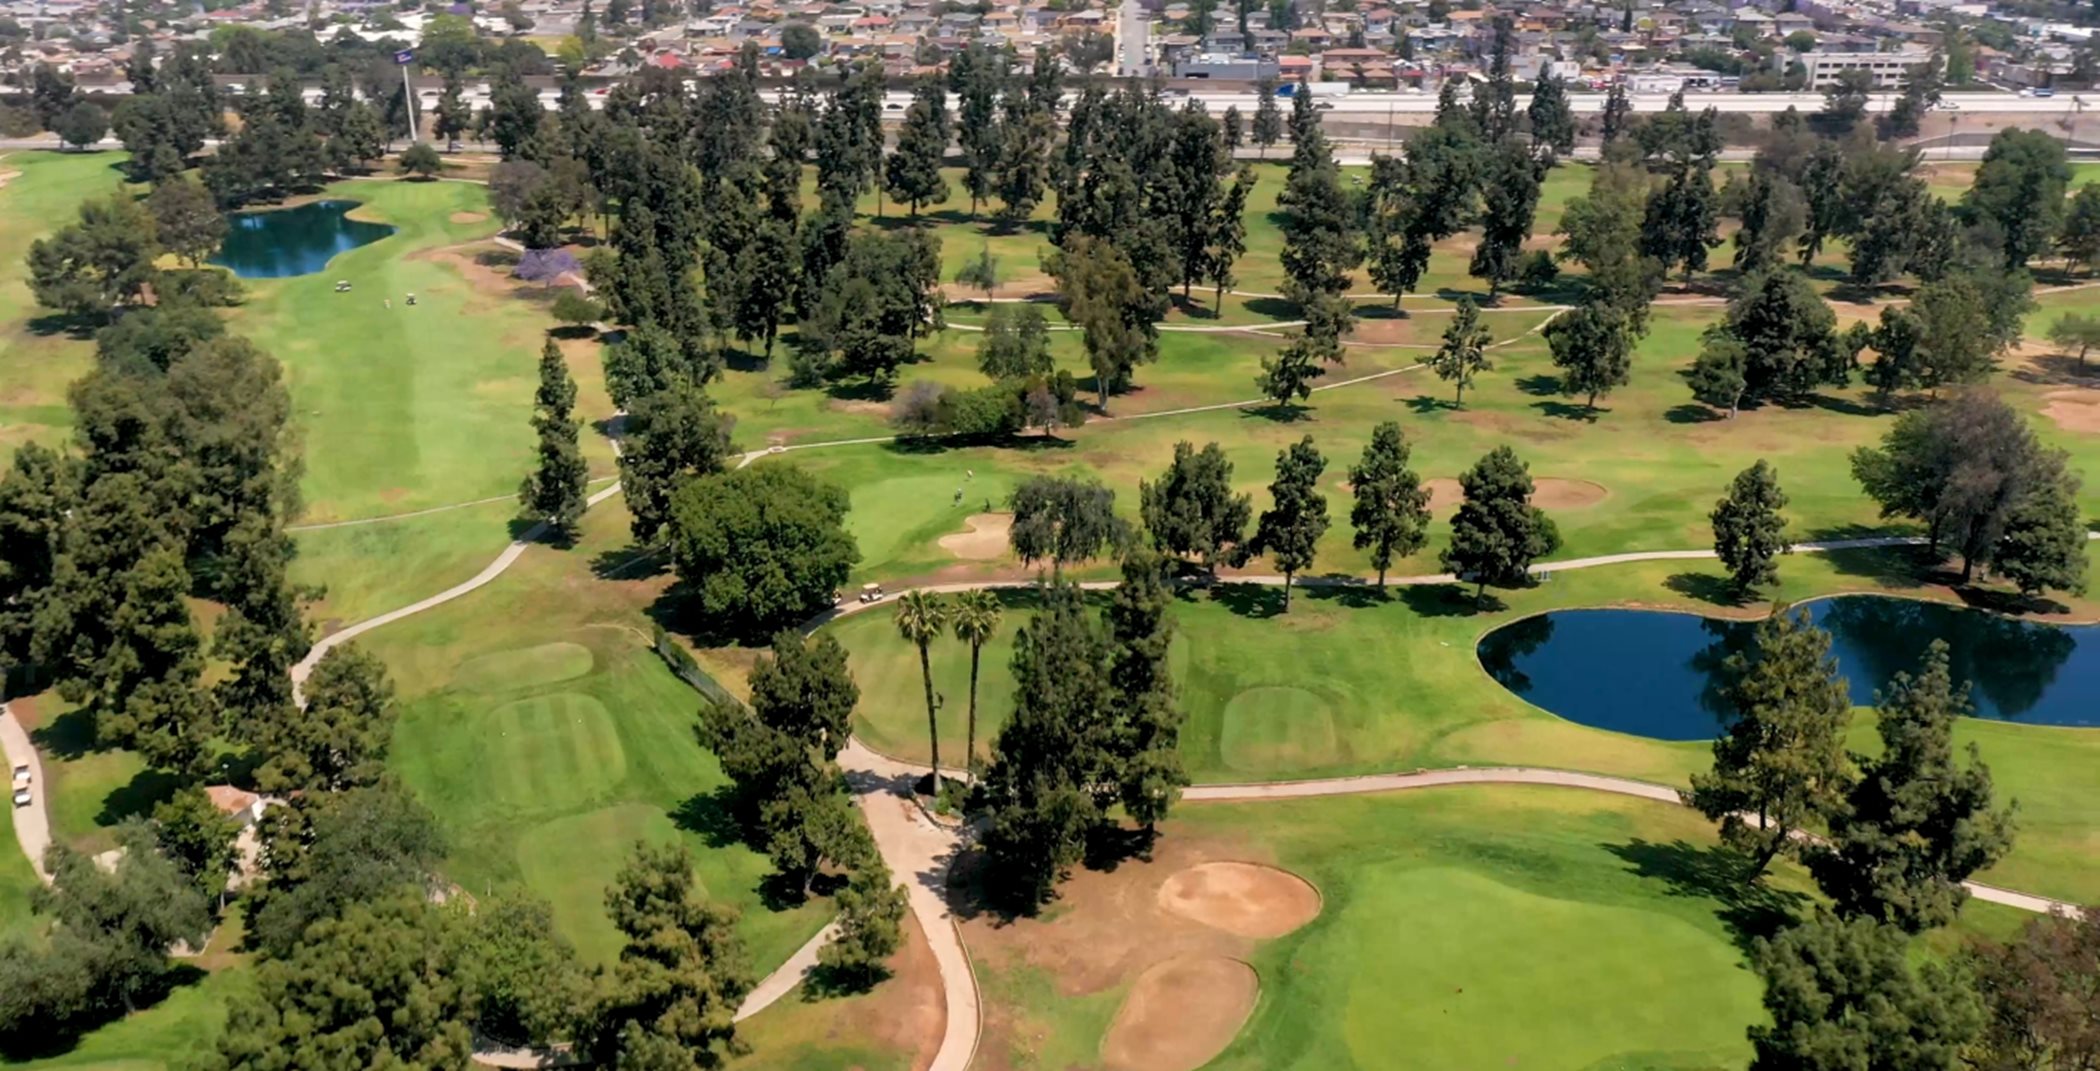 Aerial view of a golf course with lots of evergreen trees